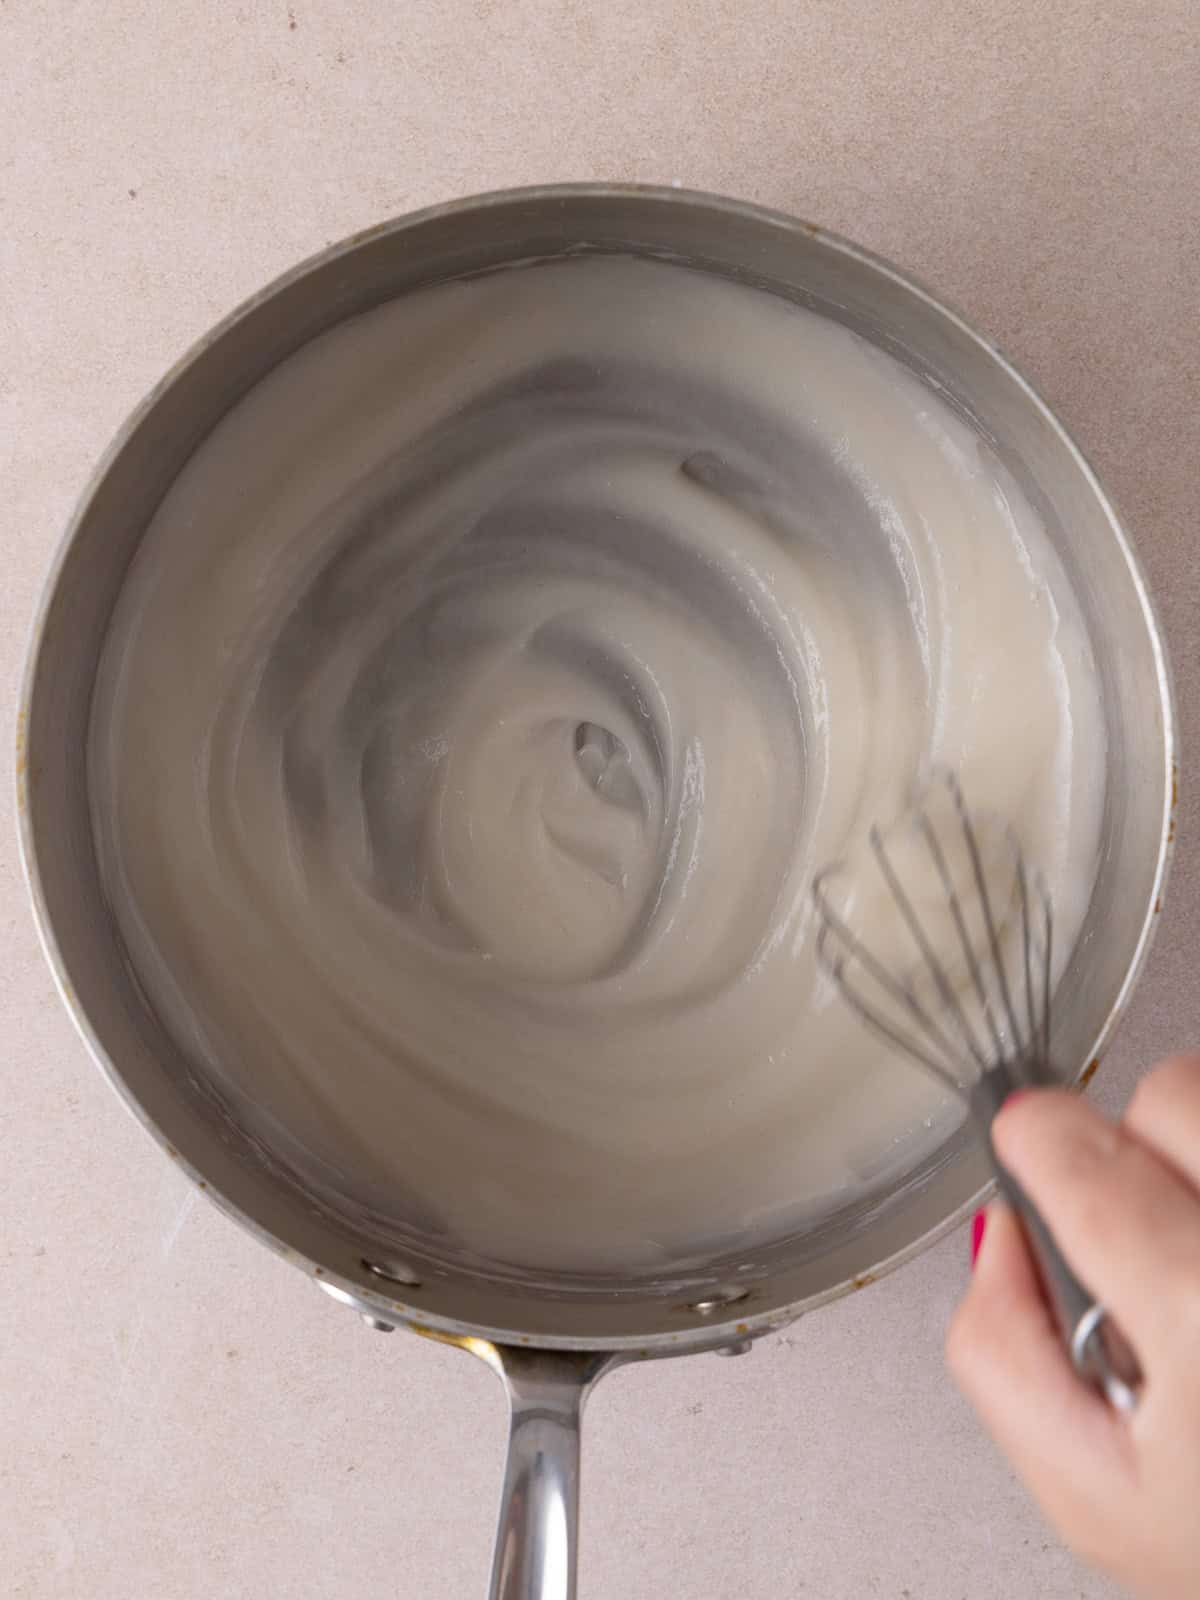 Tangzhong has thickened after whisking and cooking flour and water together in a small saucepan.